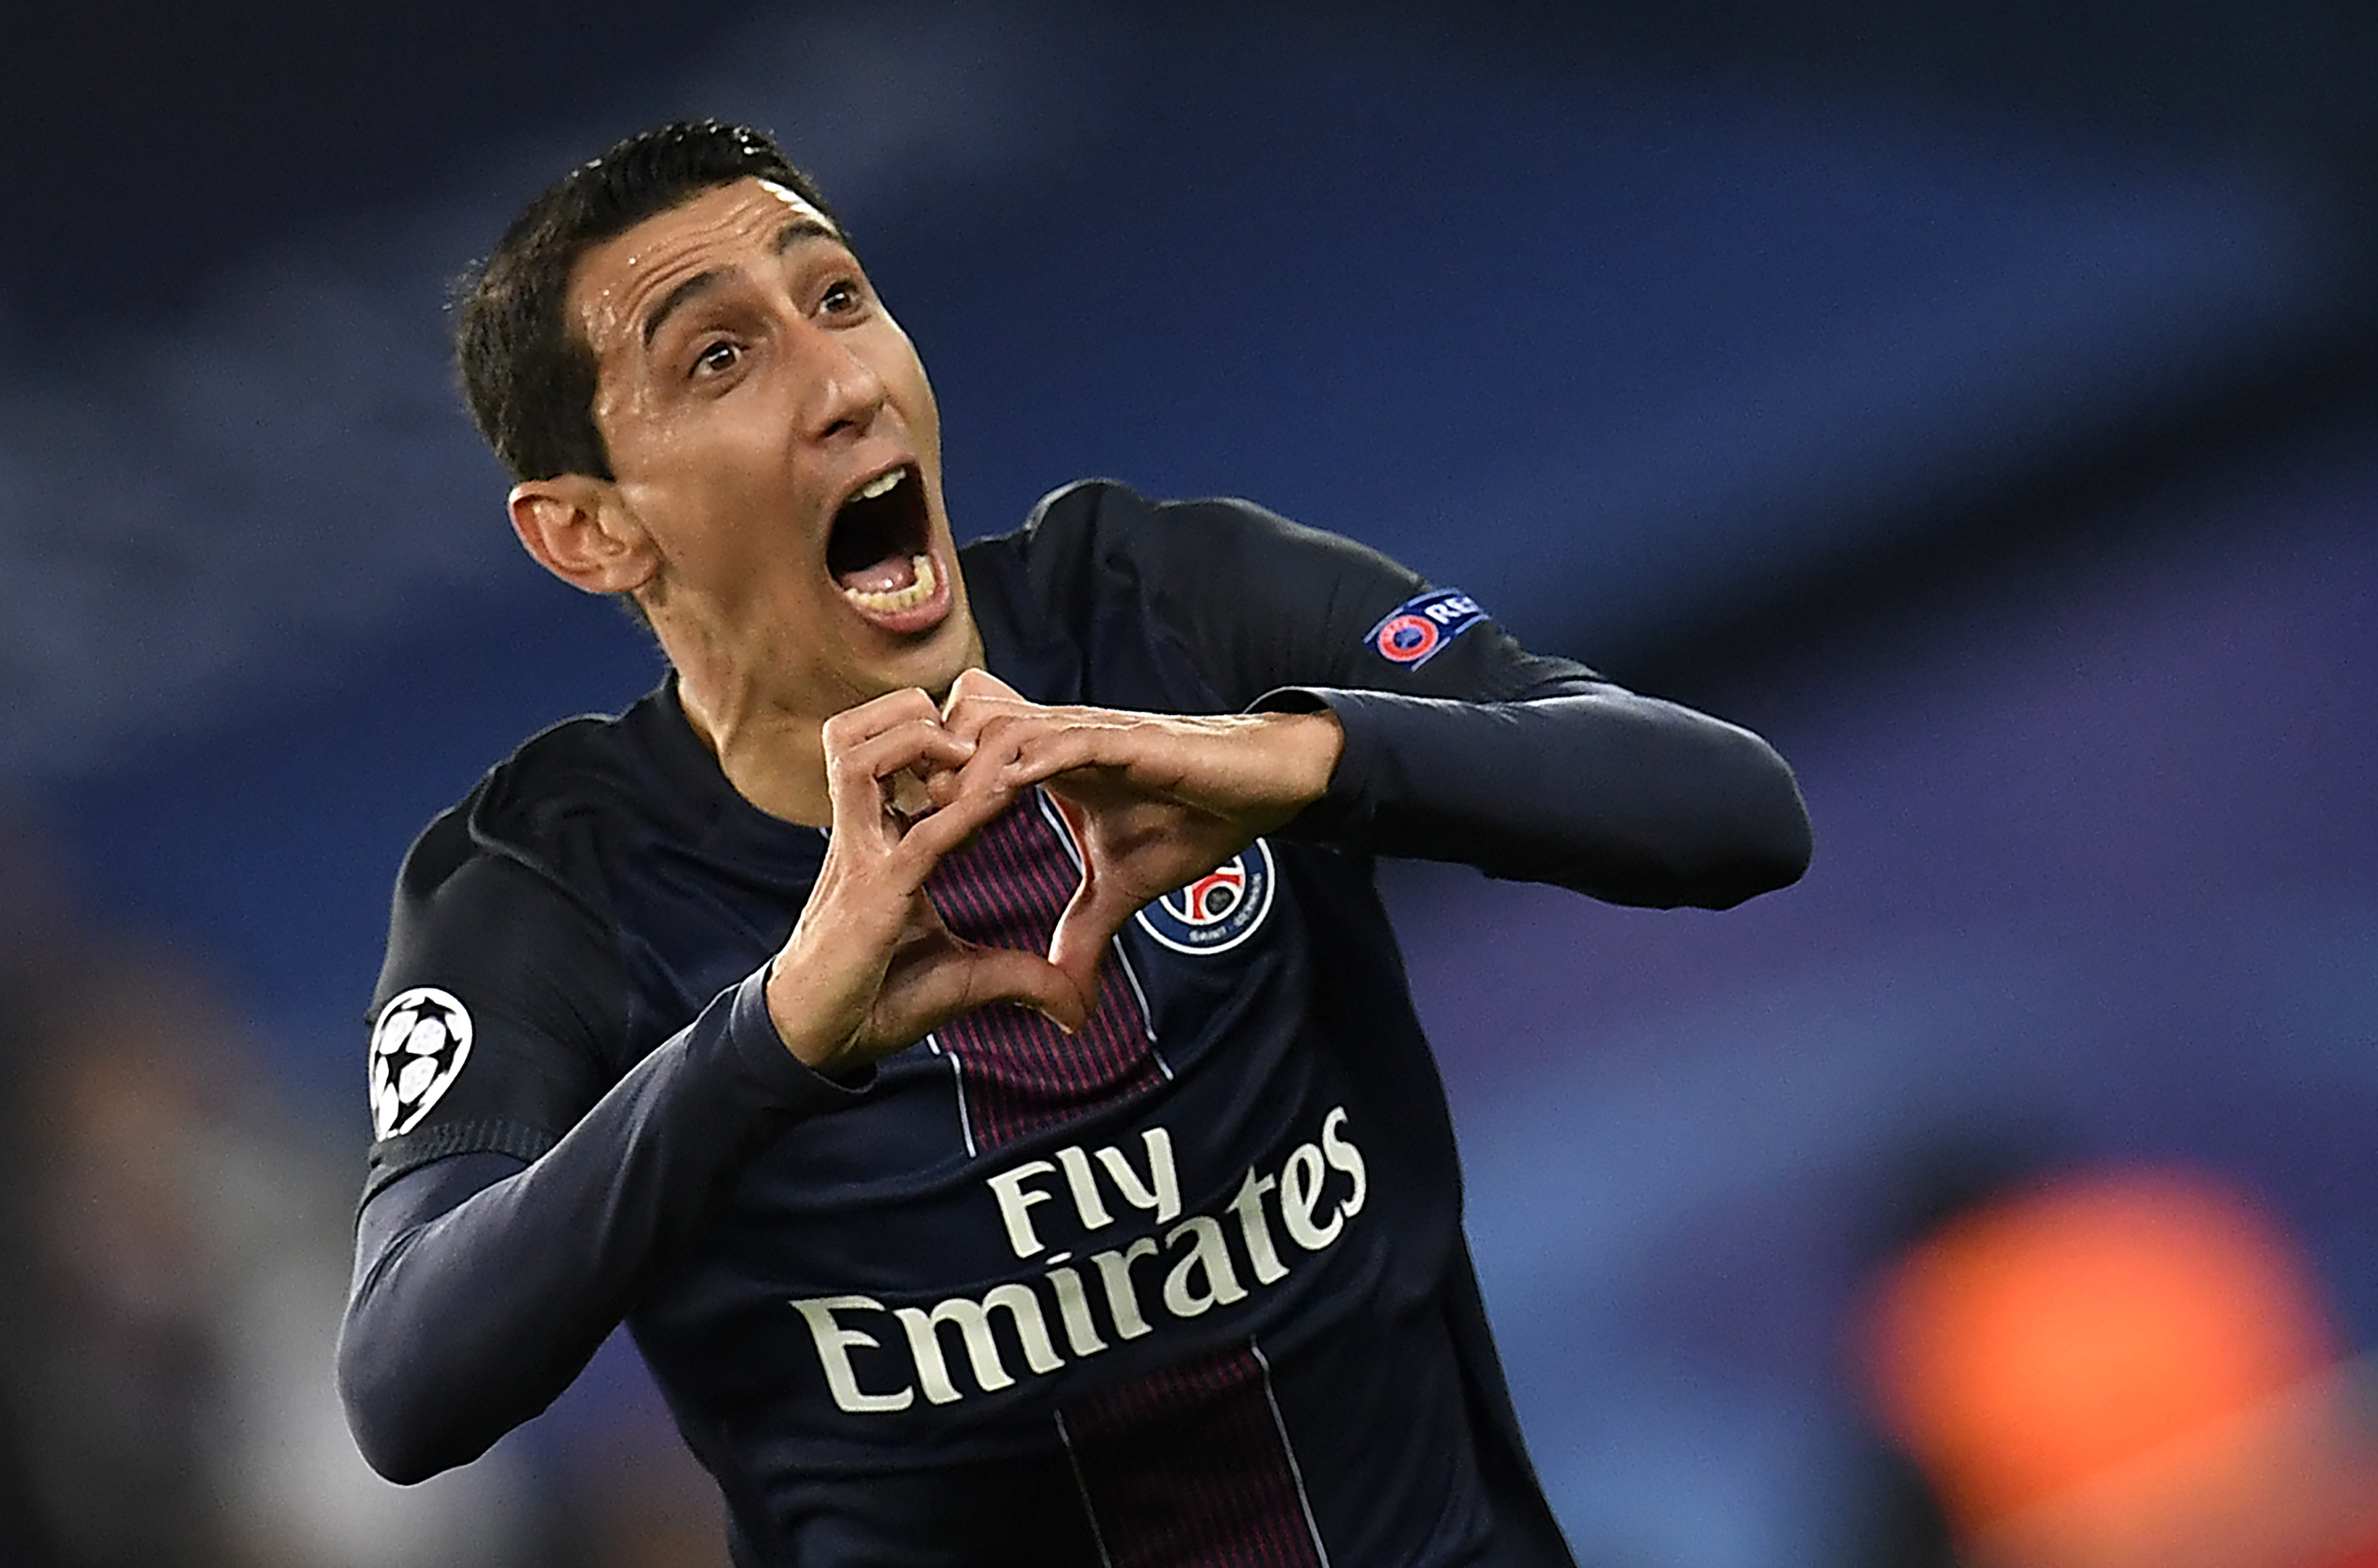 Paris Saint-Germain's Argentinian forward Angel Di Maria celebrates after scoring a goal during the UEFA Champions League round of 16 first leg football match between Paris Saint-Germain and FC Barcelona on February 14, 2017 at the Parc des Princes stadium in Paris. / AFP / CHRISTOPHE SIMON (Photo credit should read CHRISTOPHE SIMON/AFP/Getty Images)